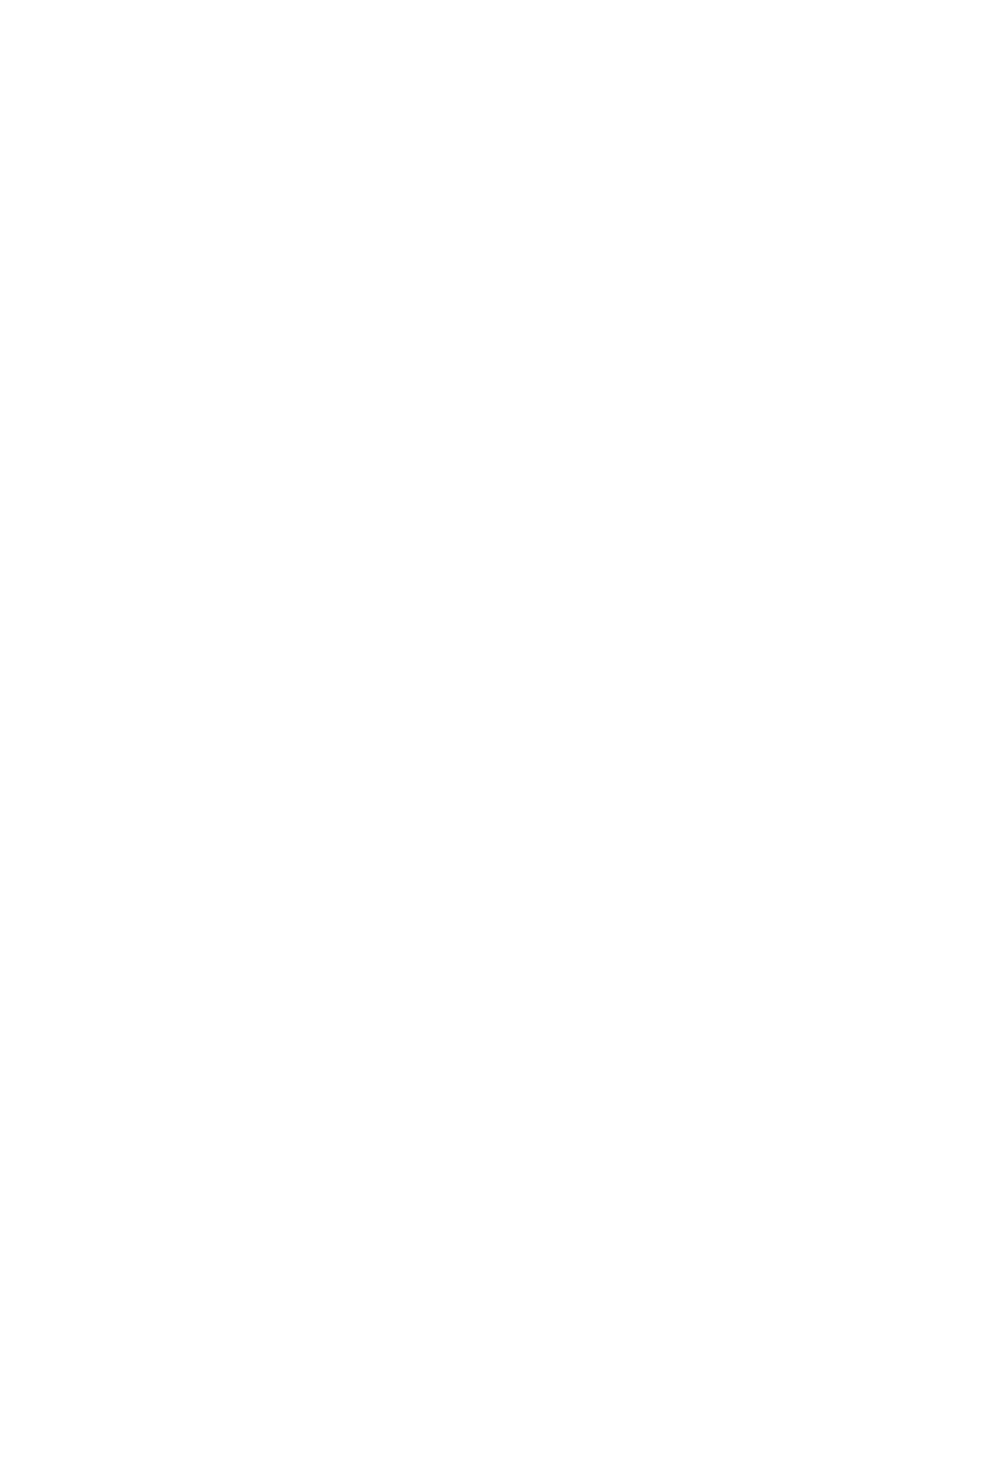 An illustrated outlined and transparent image of the Hello Alice credit card